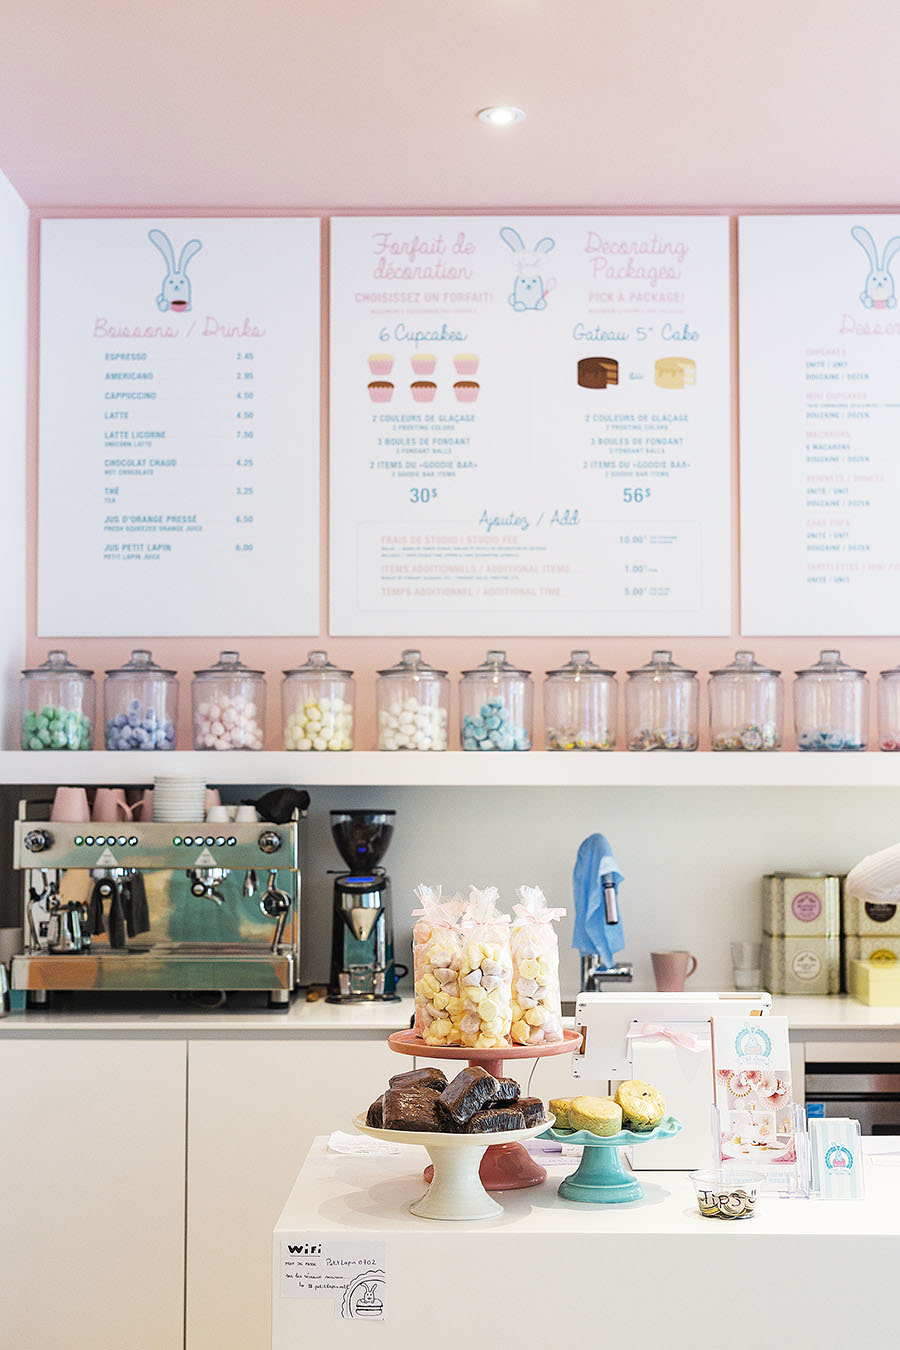 Petit Lapin patisserie, Montreal - 91 Magazine Instagrammer's guide to Montreal, Canada